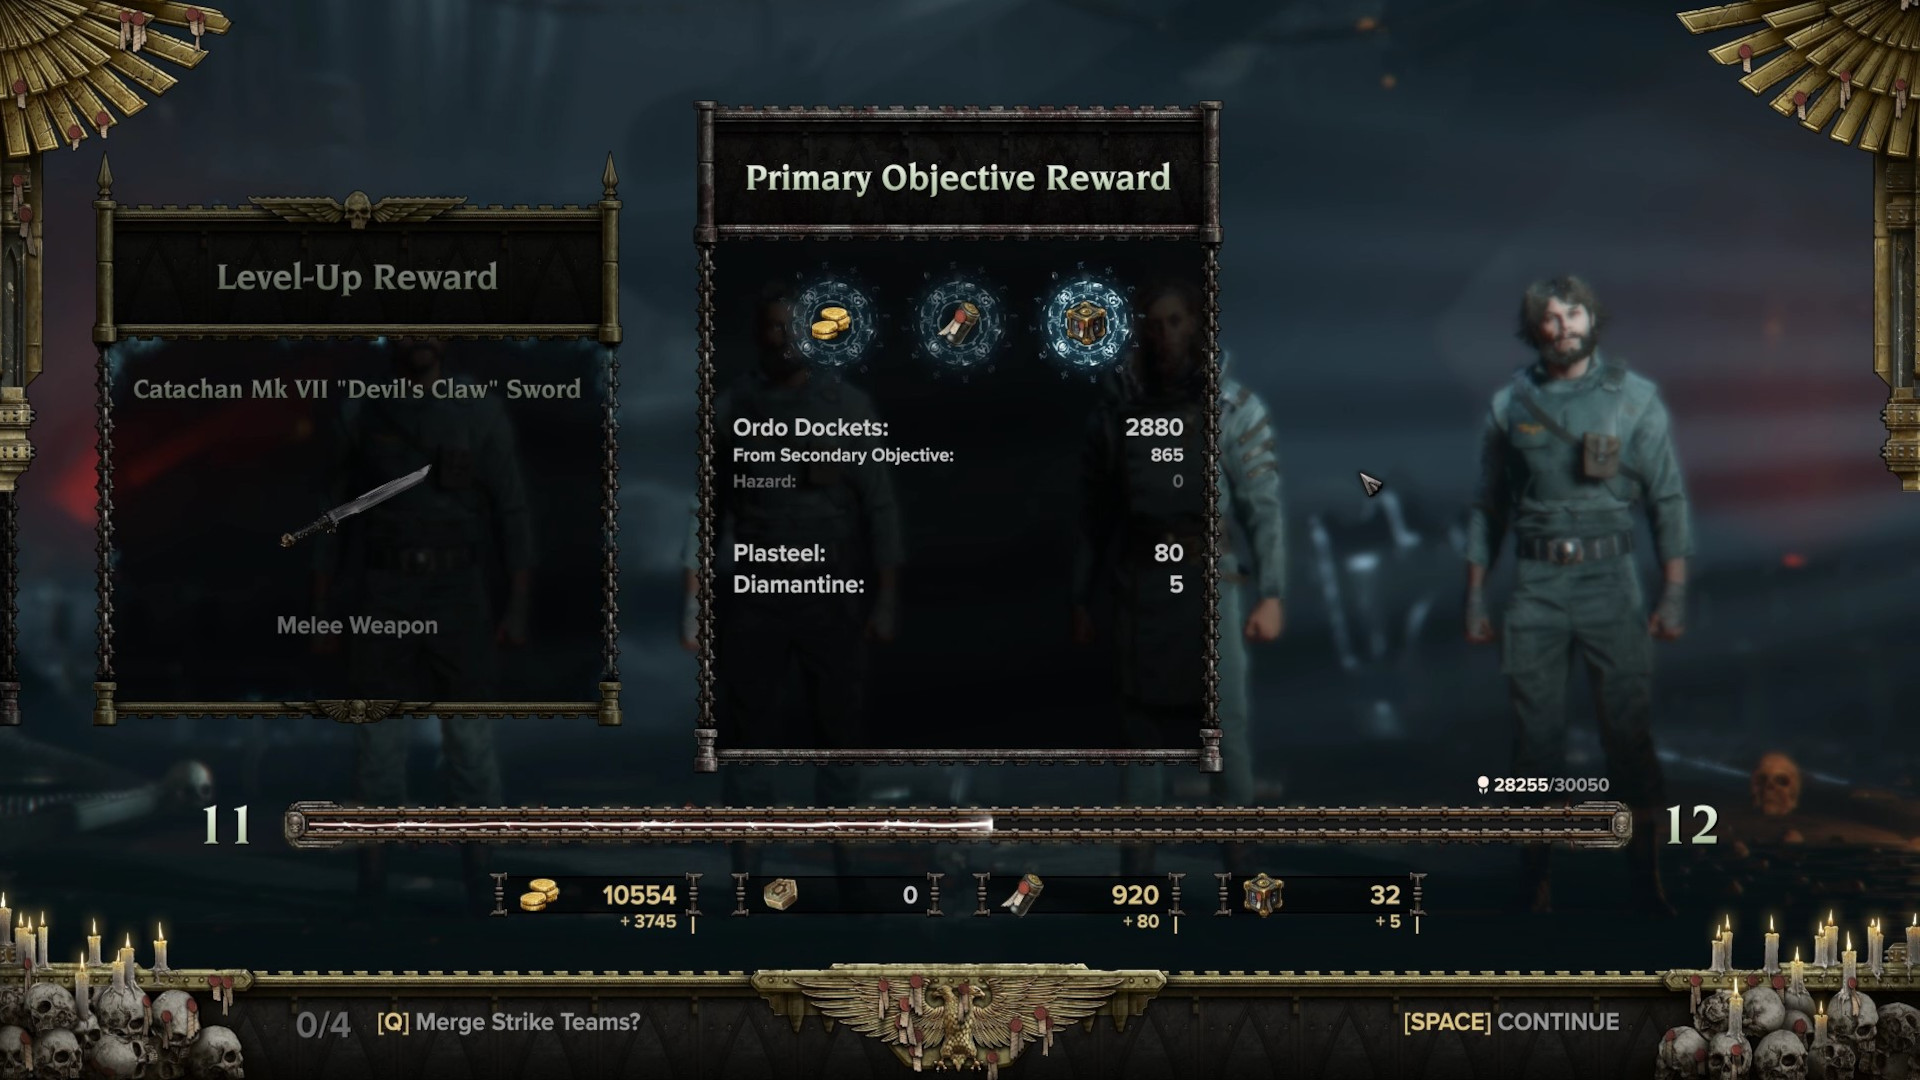 Players can get their hands on Diamantine after completing Darktide missions.